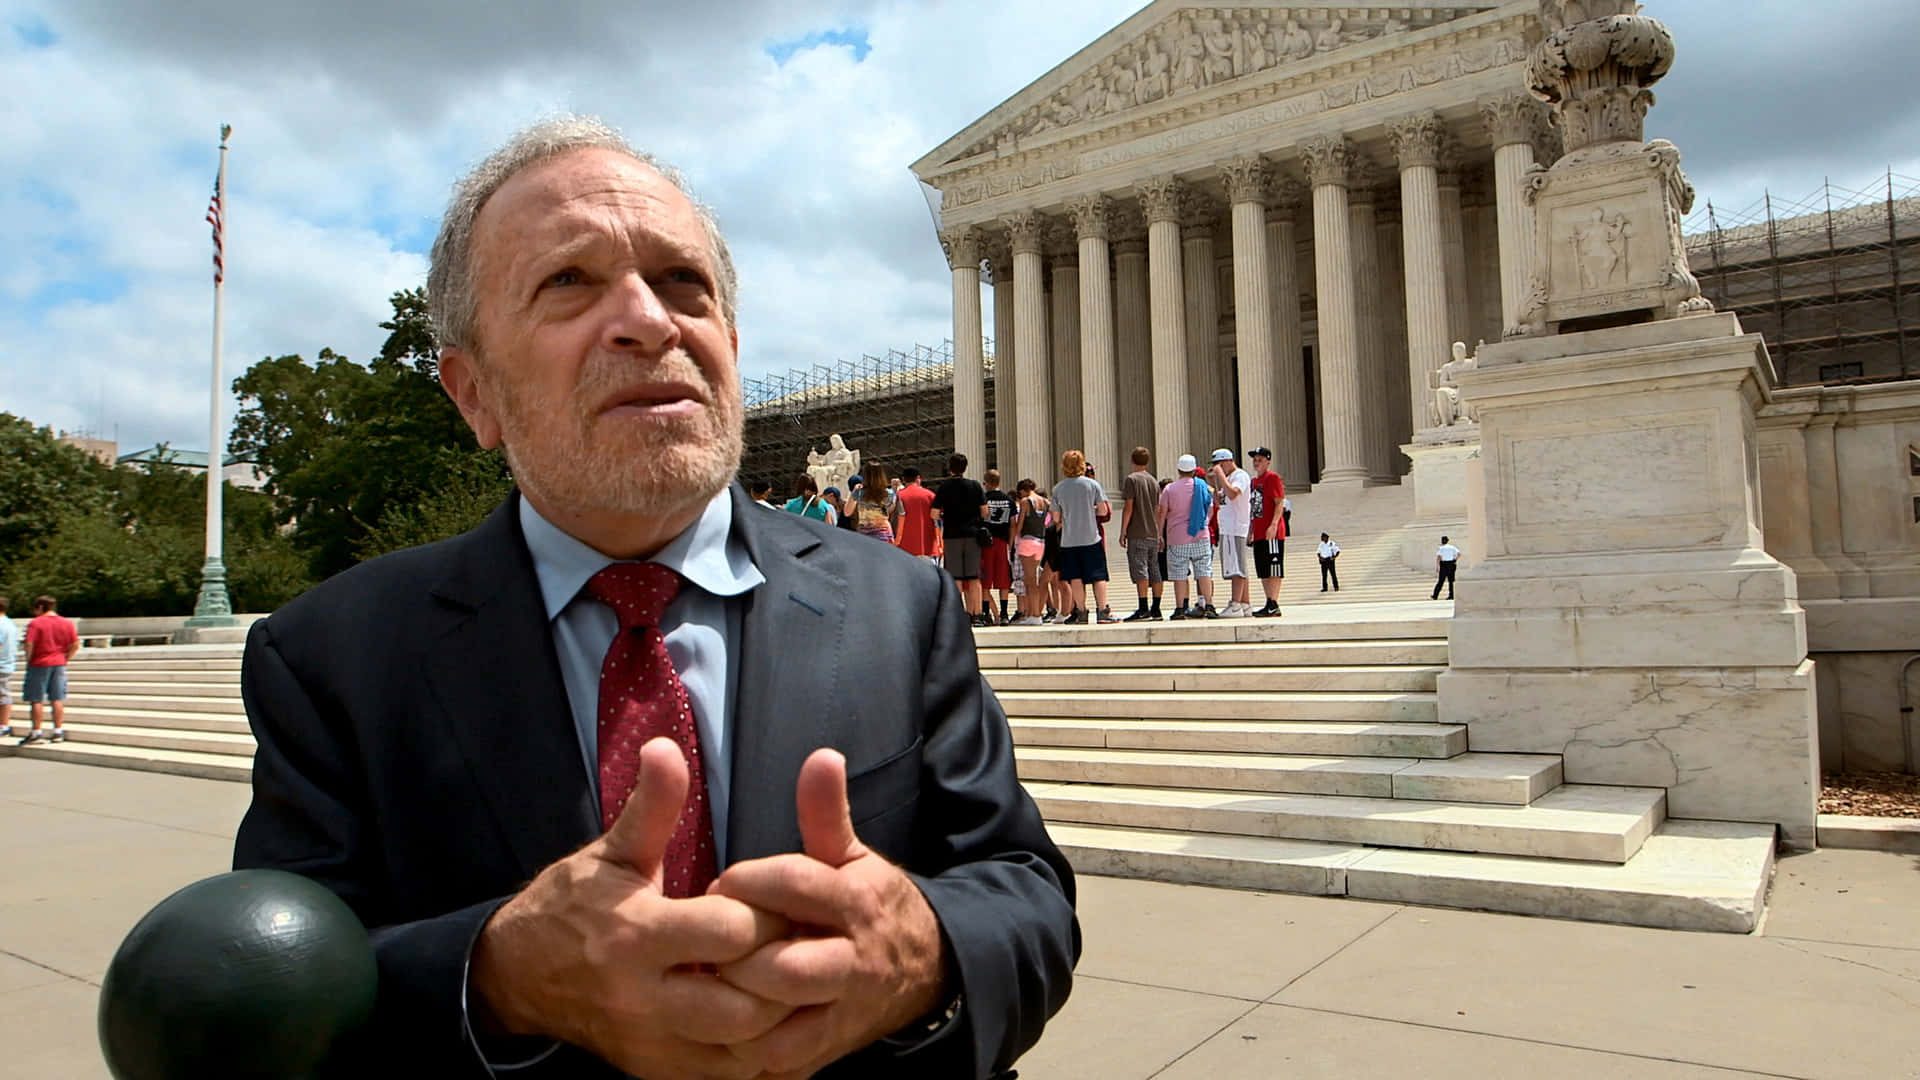 Robert Reich Delivering A Lecture. Wallpaper